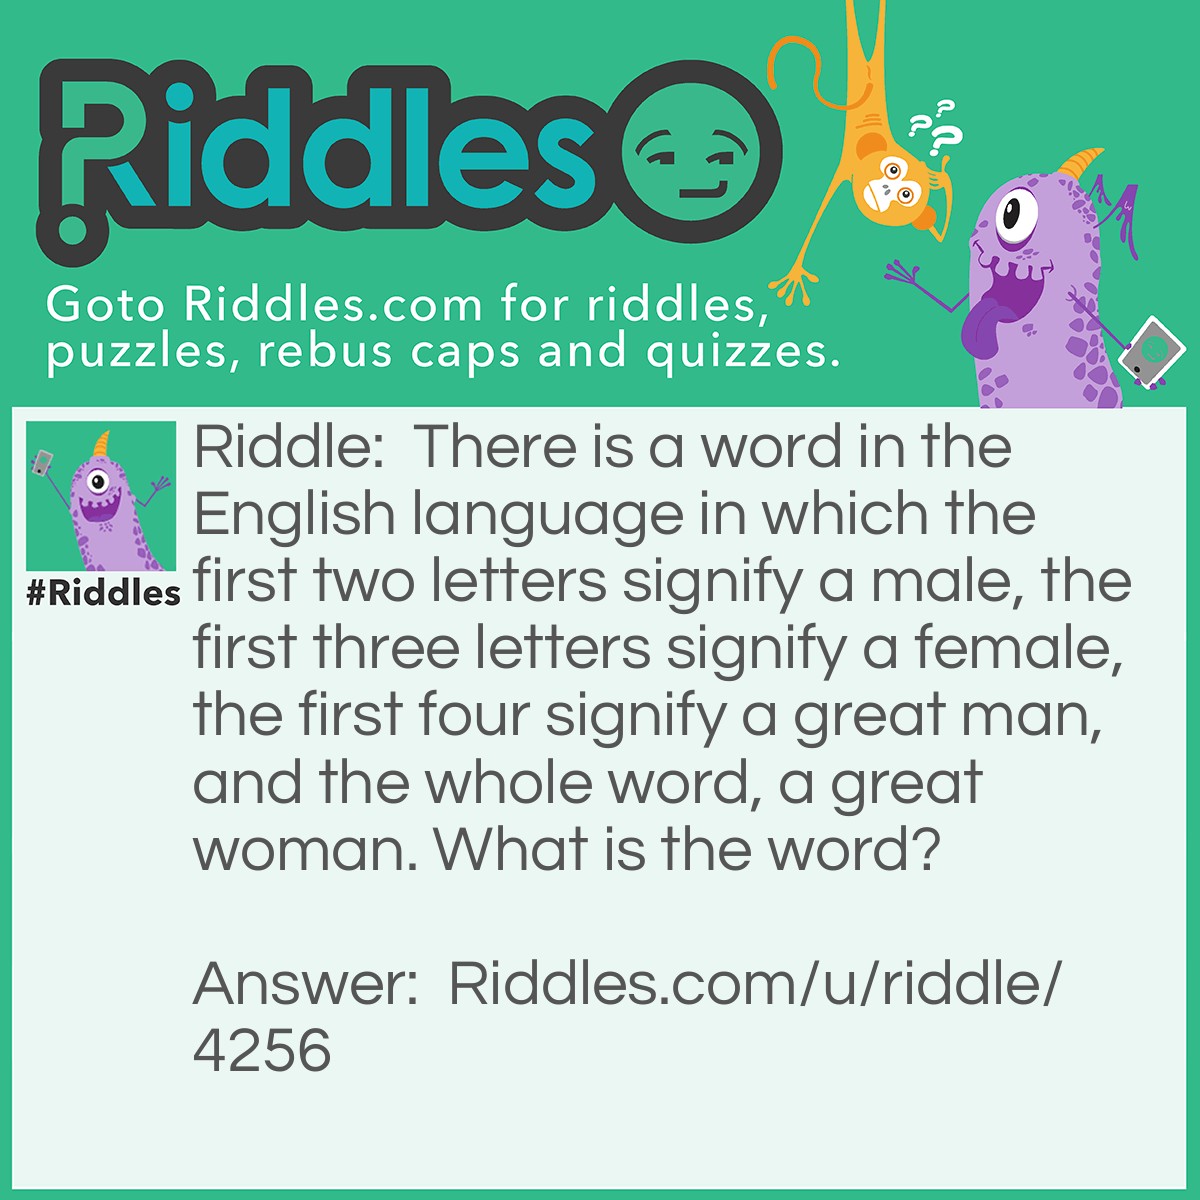 Riddle: There is a word in the English language in which the first two letters signify a male, the first three letters signify a female, the first four signify a great man, and the whole word, a great woman. What is the word? Answer: Heroine.